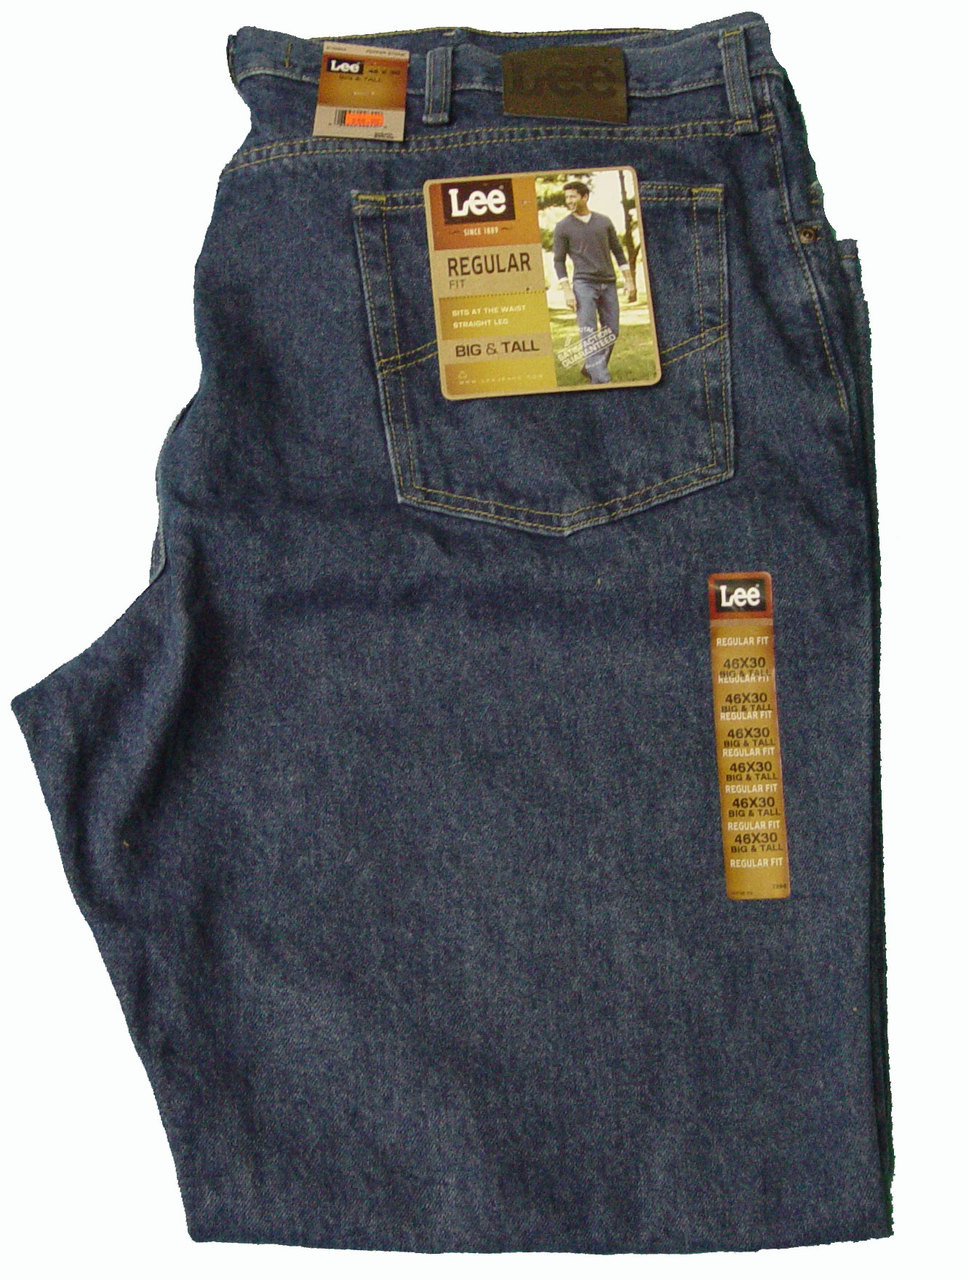 46x30 jeans